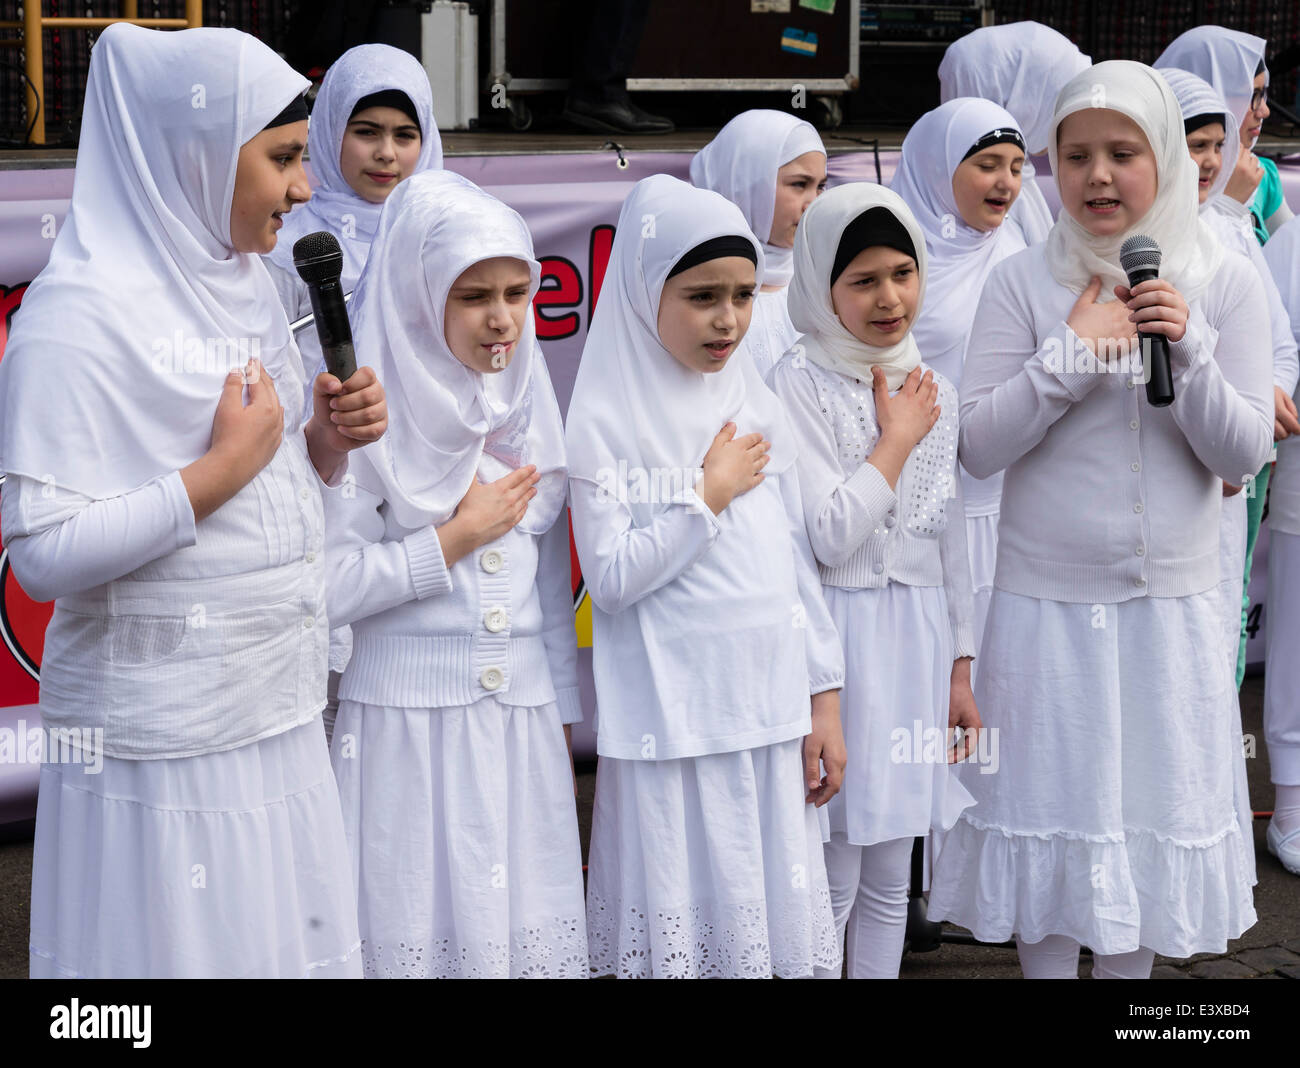 Young girls of Turkish origin who live in Germany sing religious songs, wearing traditional Turkish clothes. Stock Photo